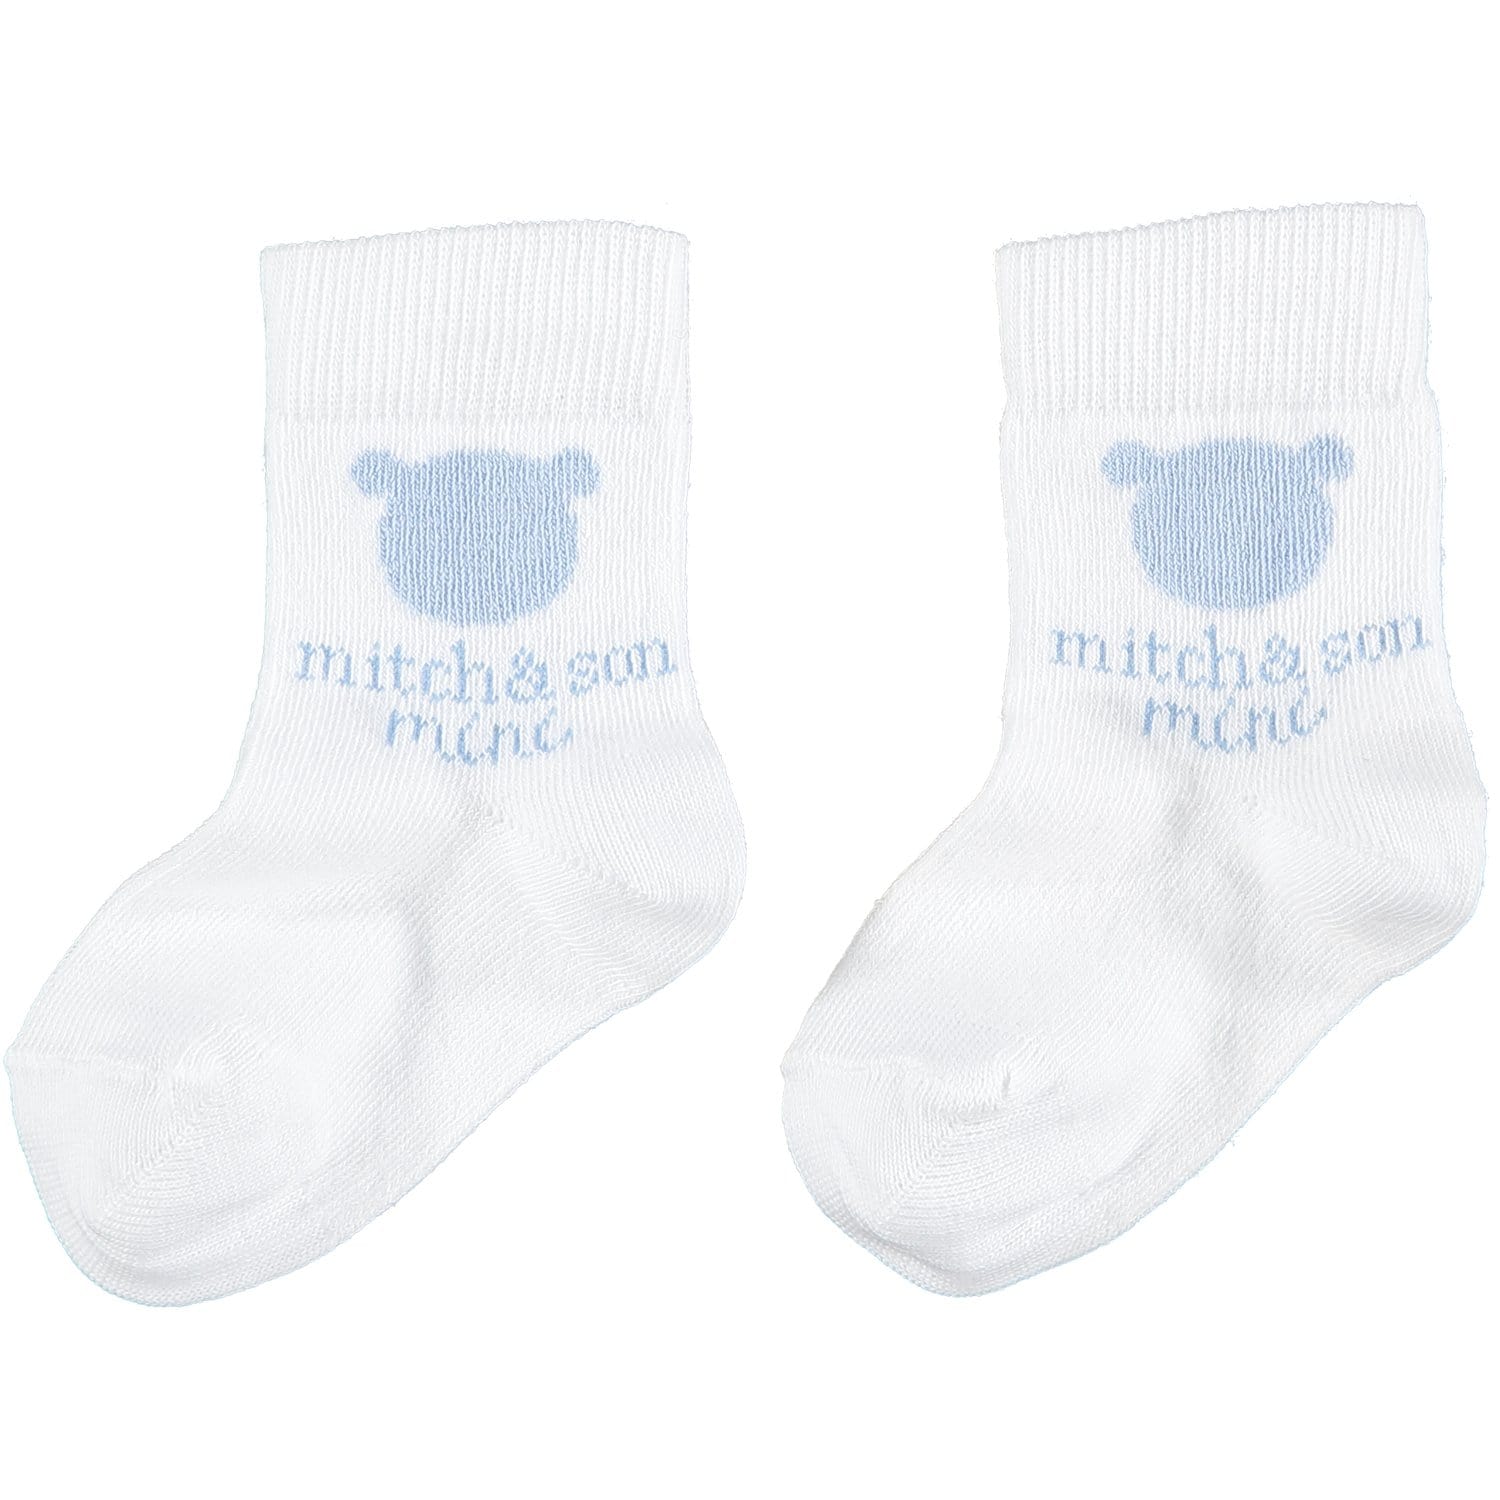 MITCH & SON - Drew Two Pack Sock - Pale Blue